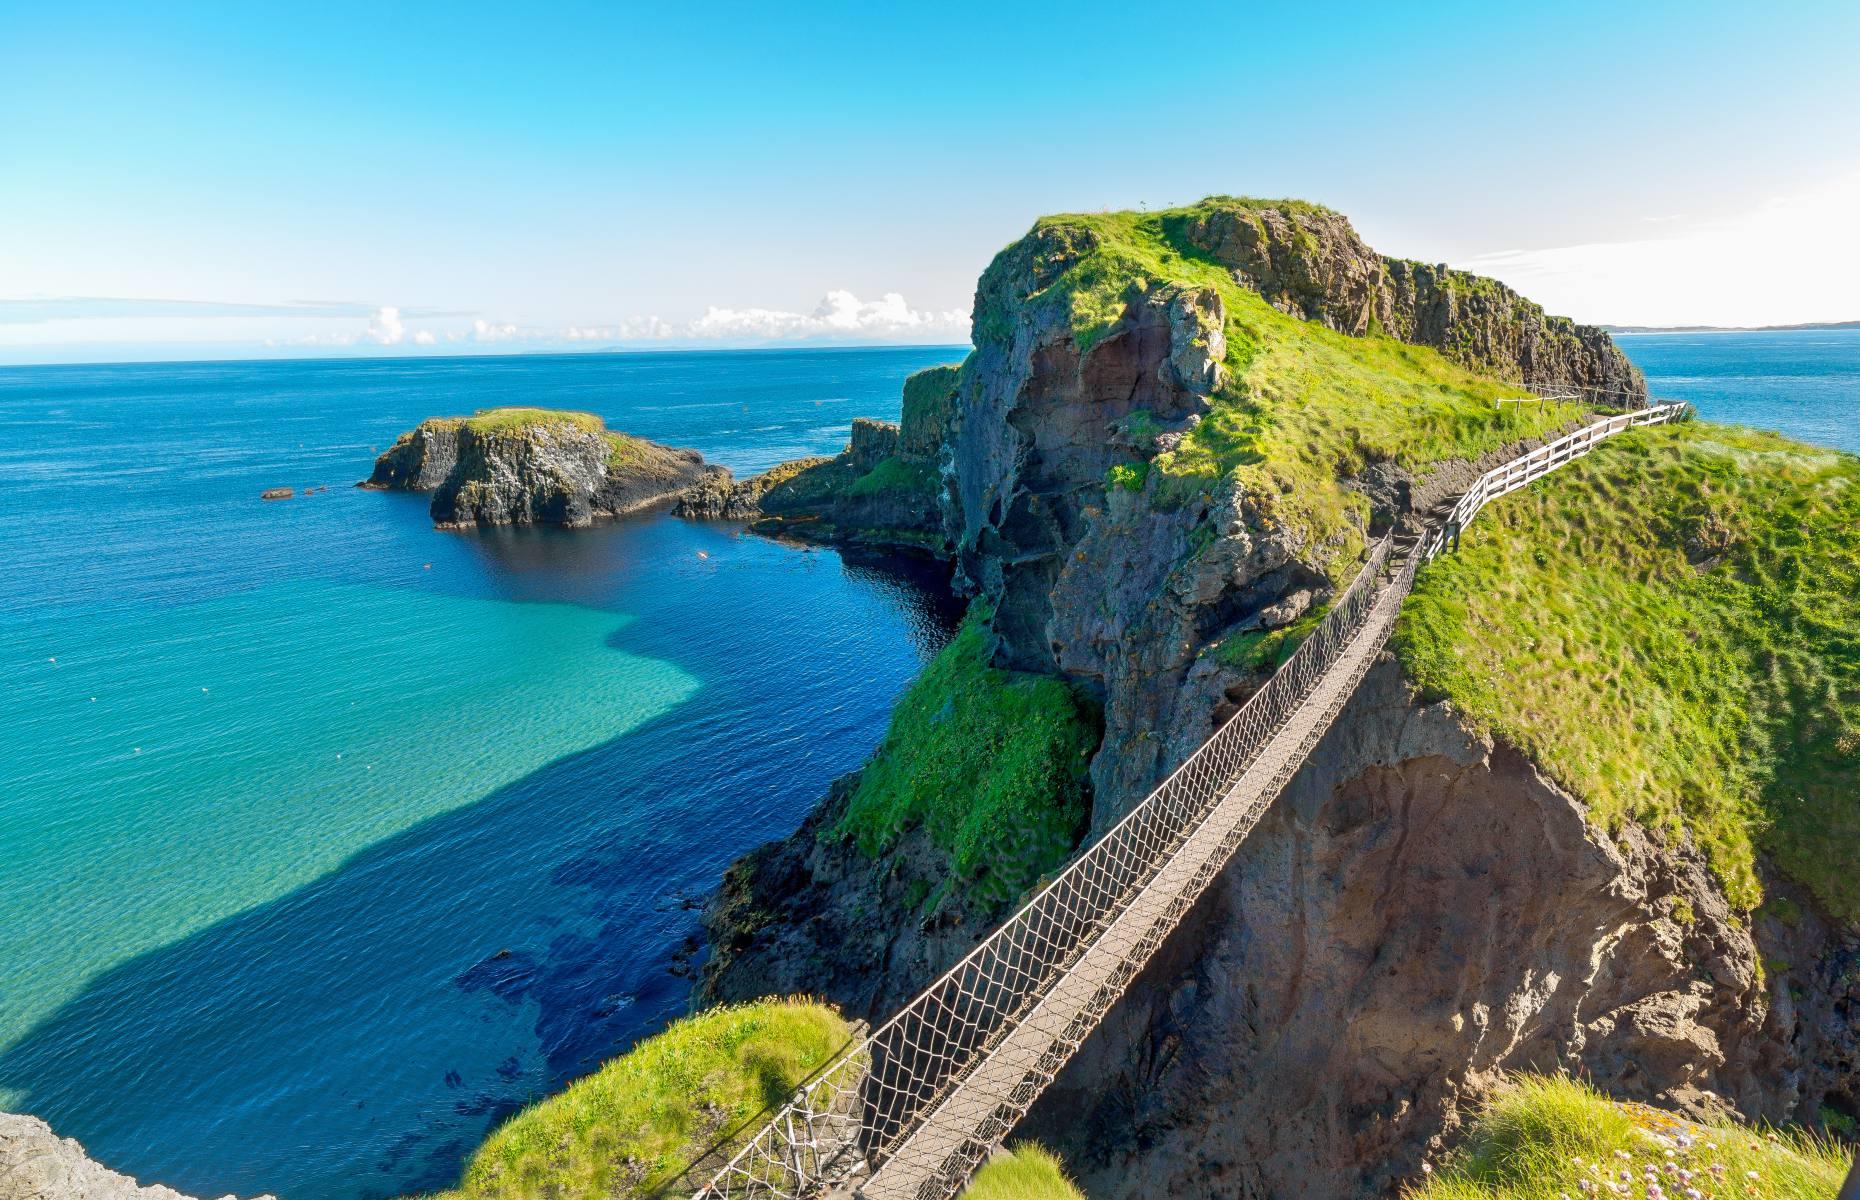 <p>Erected by salmon fishermen more than 250 years ago, the <a href="https://www.nationaltrust.org.uk/carrick-a-rede">Carrick-a-Rede Rope Bridge</a> is one of Northern Ireland’s most incredible landmarks. Built to link the County Antrim mainland to Carrick-a-Rede island, the wooden bridge is suspended 98 feet above the sea and measures roughly 66 feet long. High above the crashing waves of the Atlantic Ocean and surrounded by beautiful coastline, the rope bridge has become a popular tourist attraction for thrill-seekers.</p>